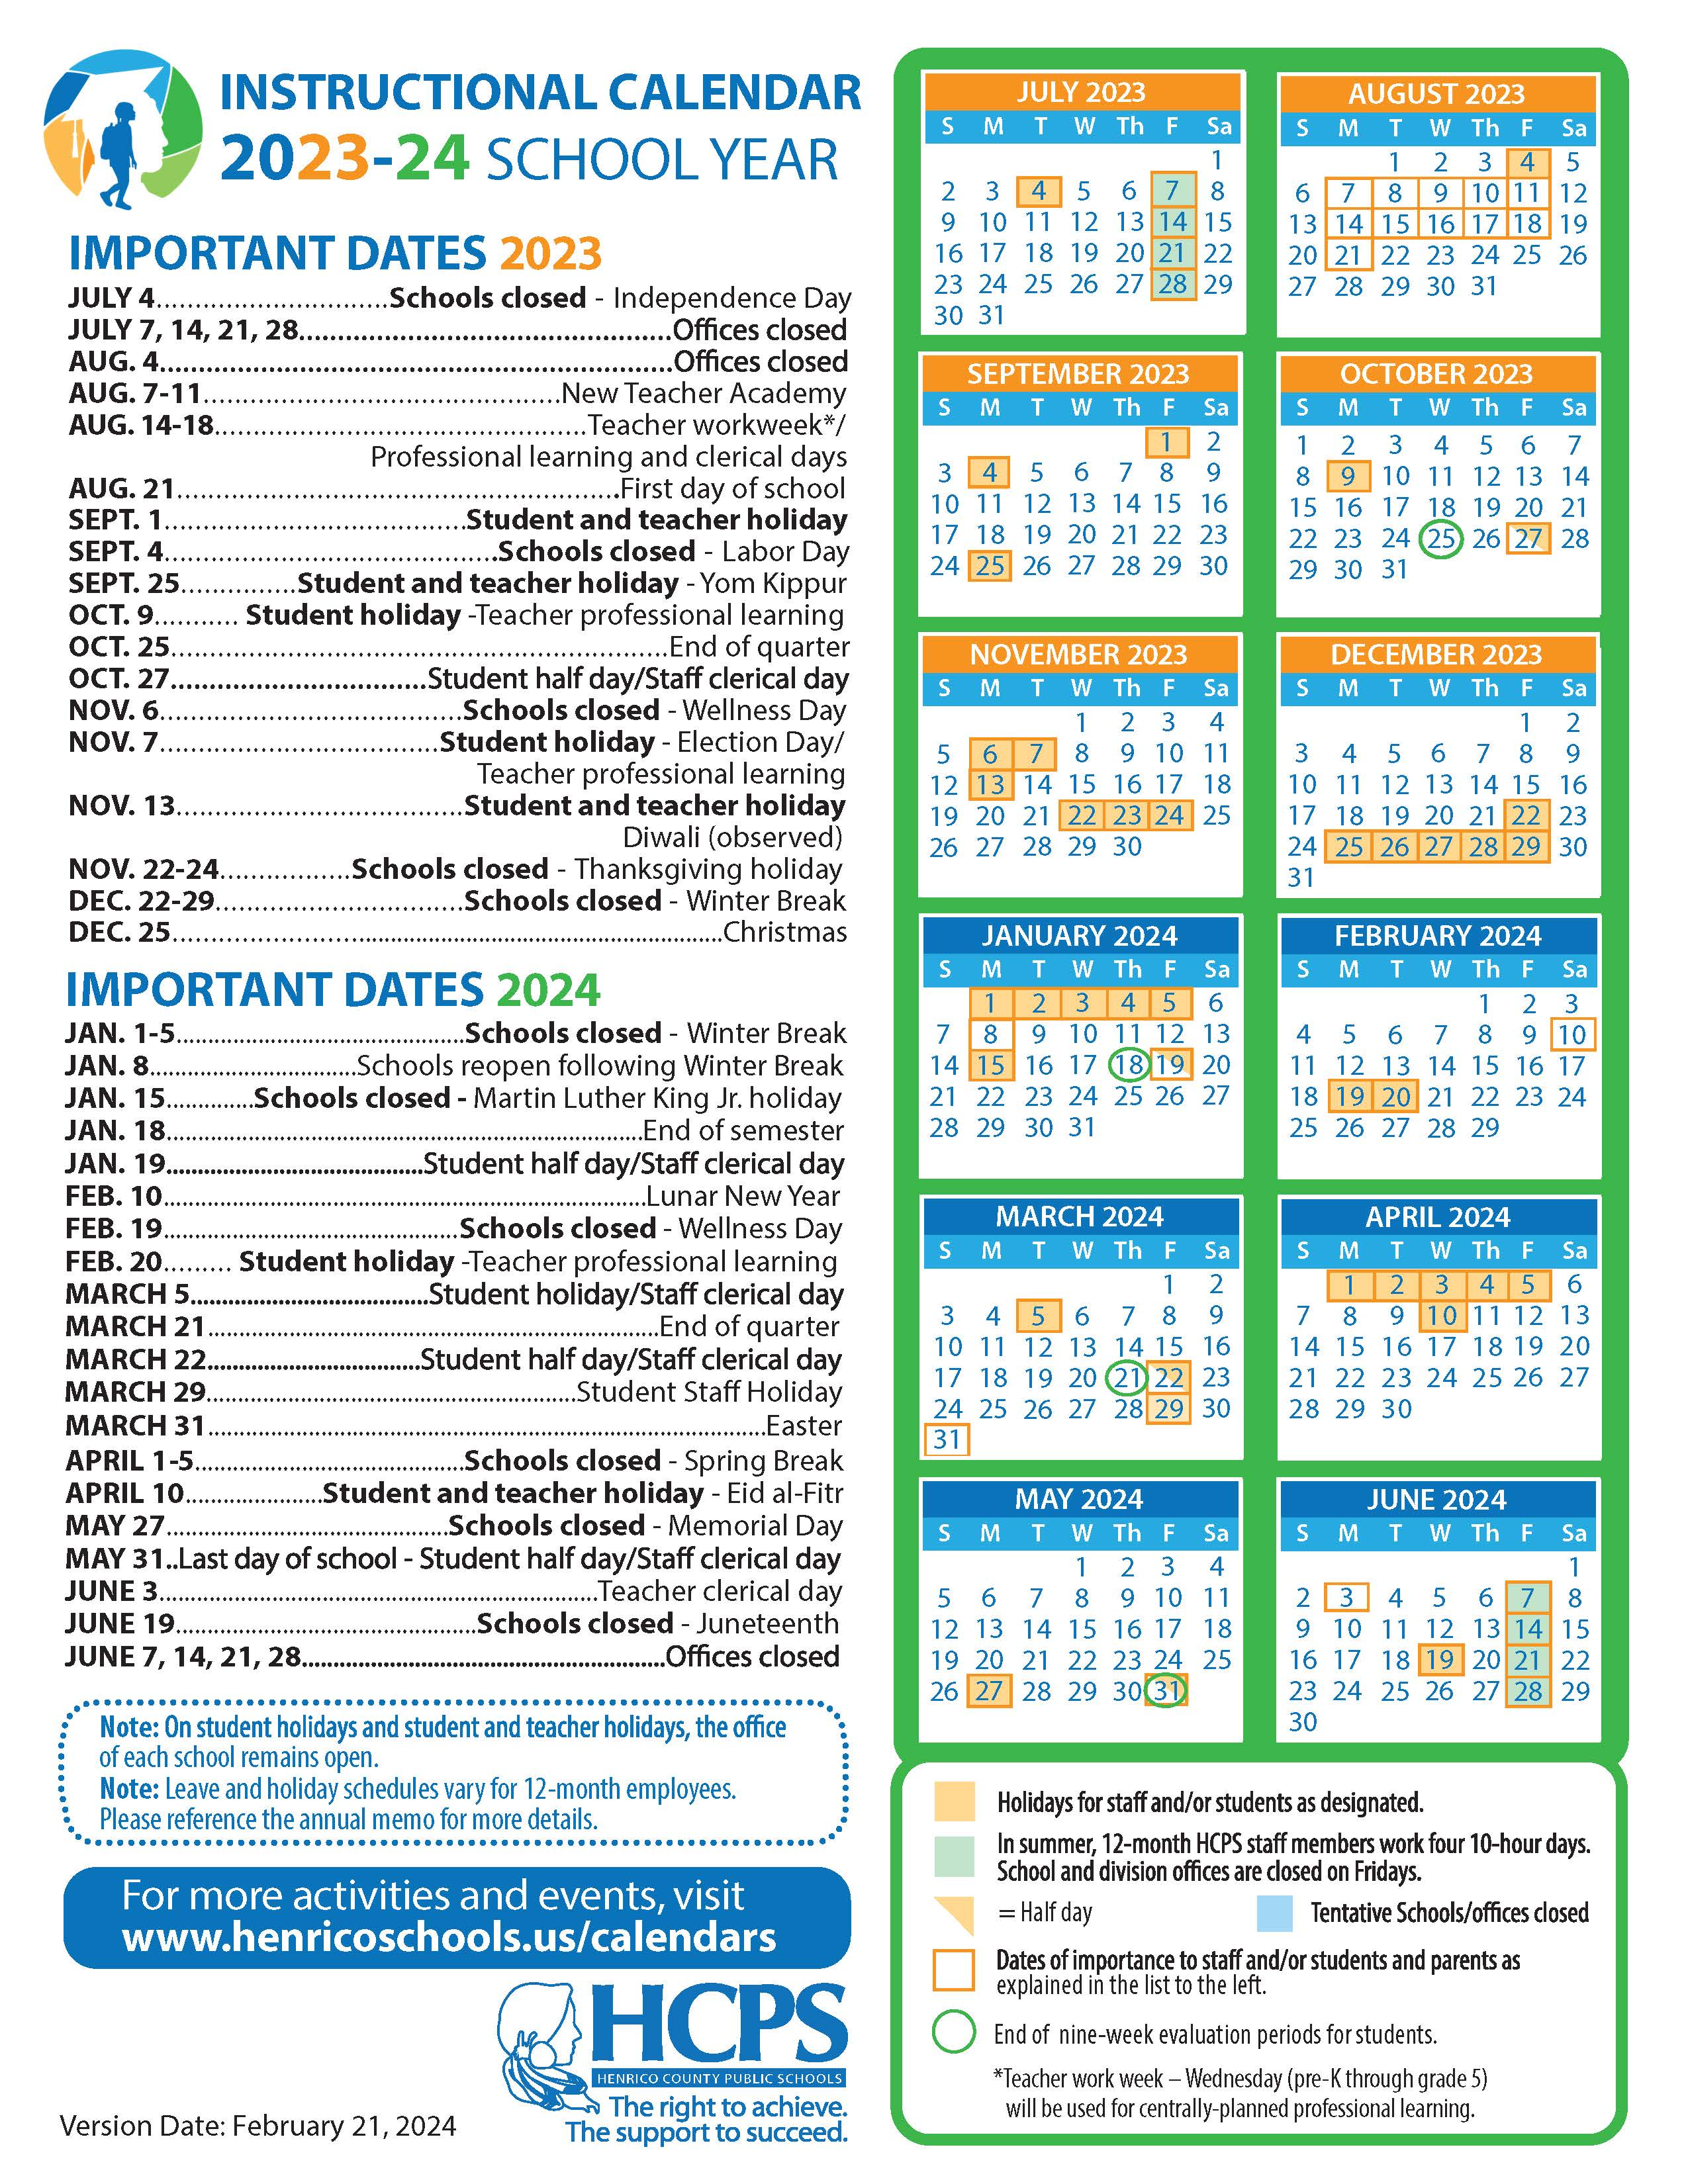 2023-24 School year calendar with highlighted dates